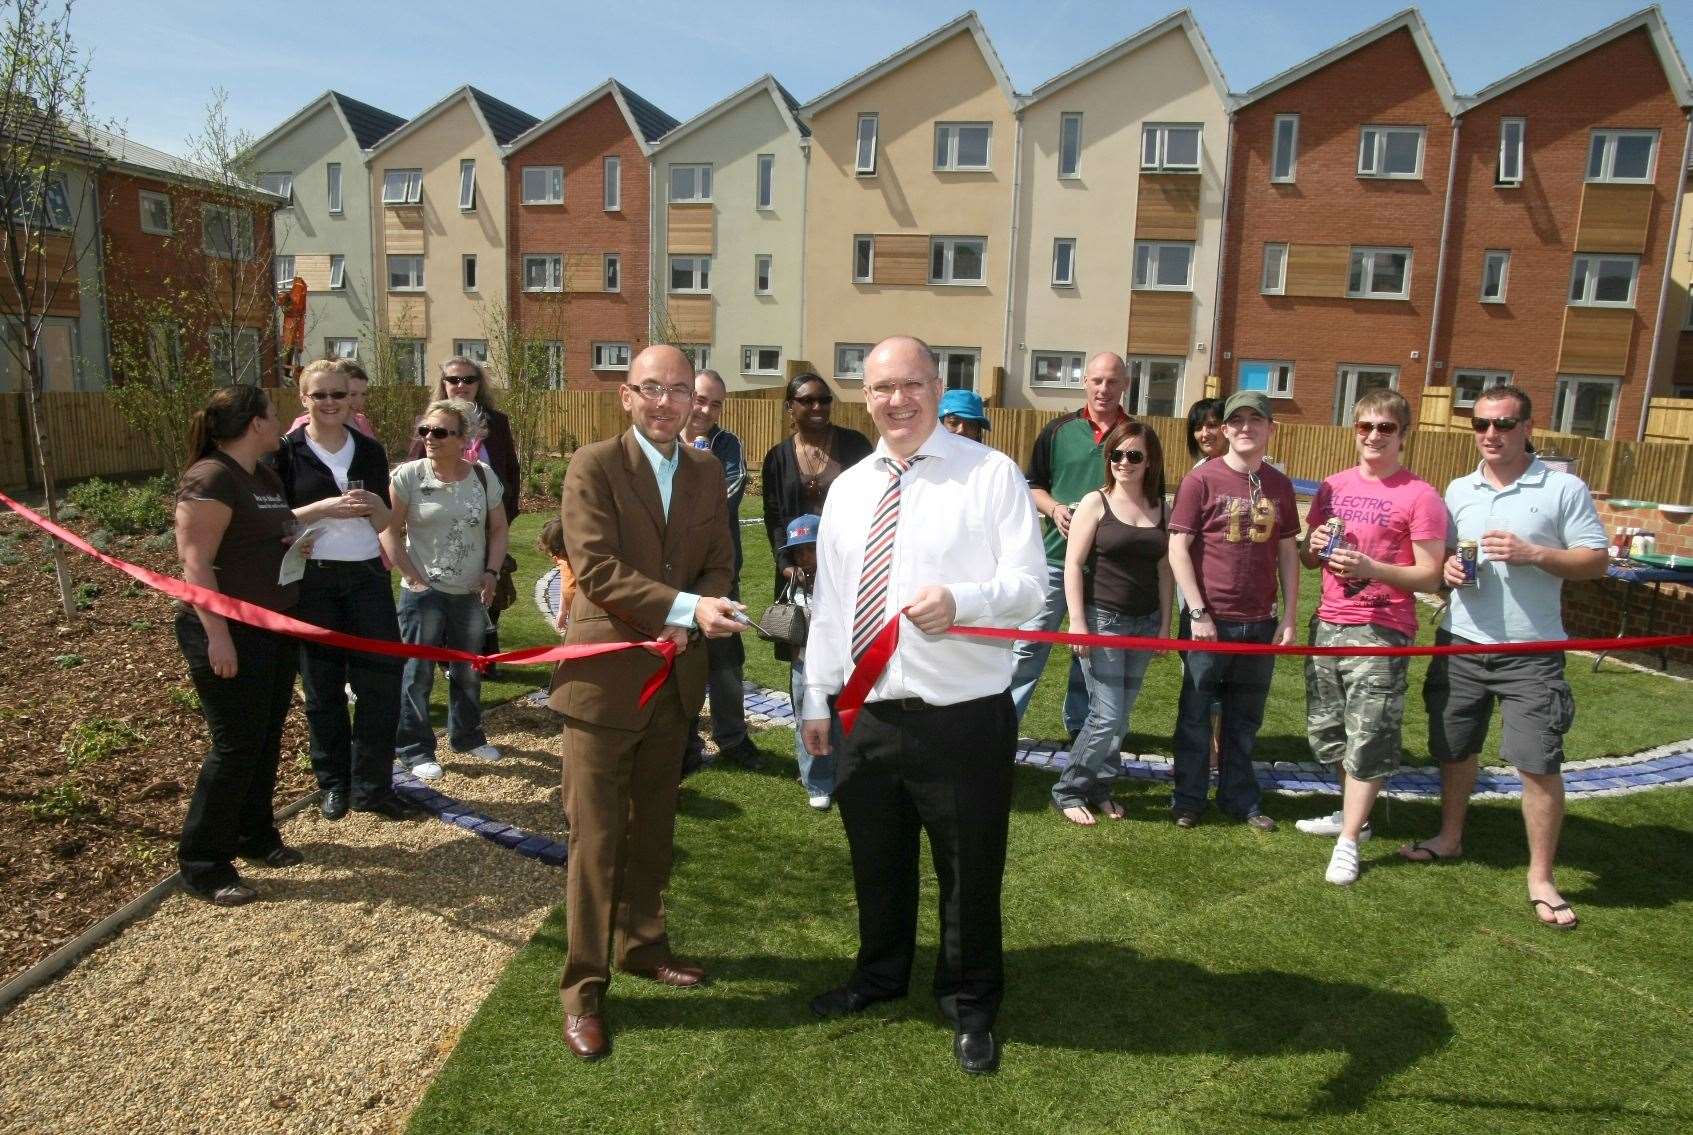 Designer Wayne Hemingway and Jeremy Kite, Dartford Borough Council, cut the ribbon on the first green community spaces to be completed at The Bridge, Dartford, and then celebrated with a barbecue, back in May 2008. Image: Ronan McCloud, BlueIce Communications